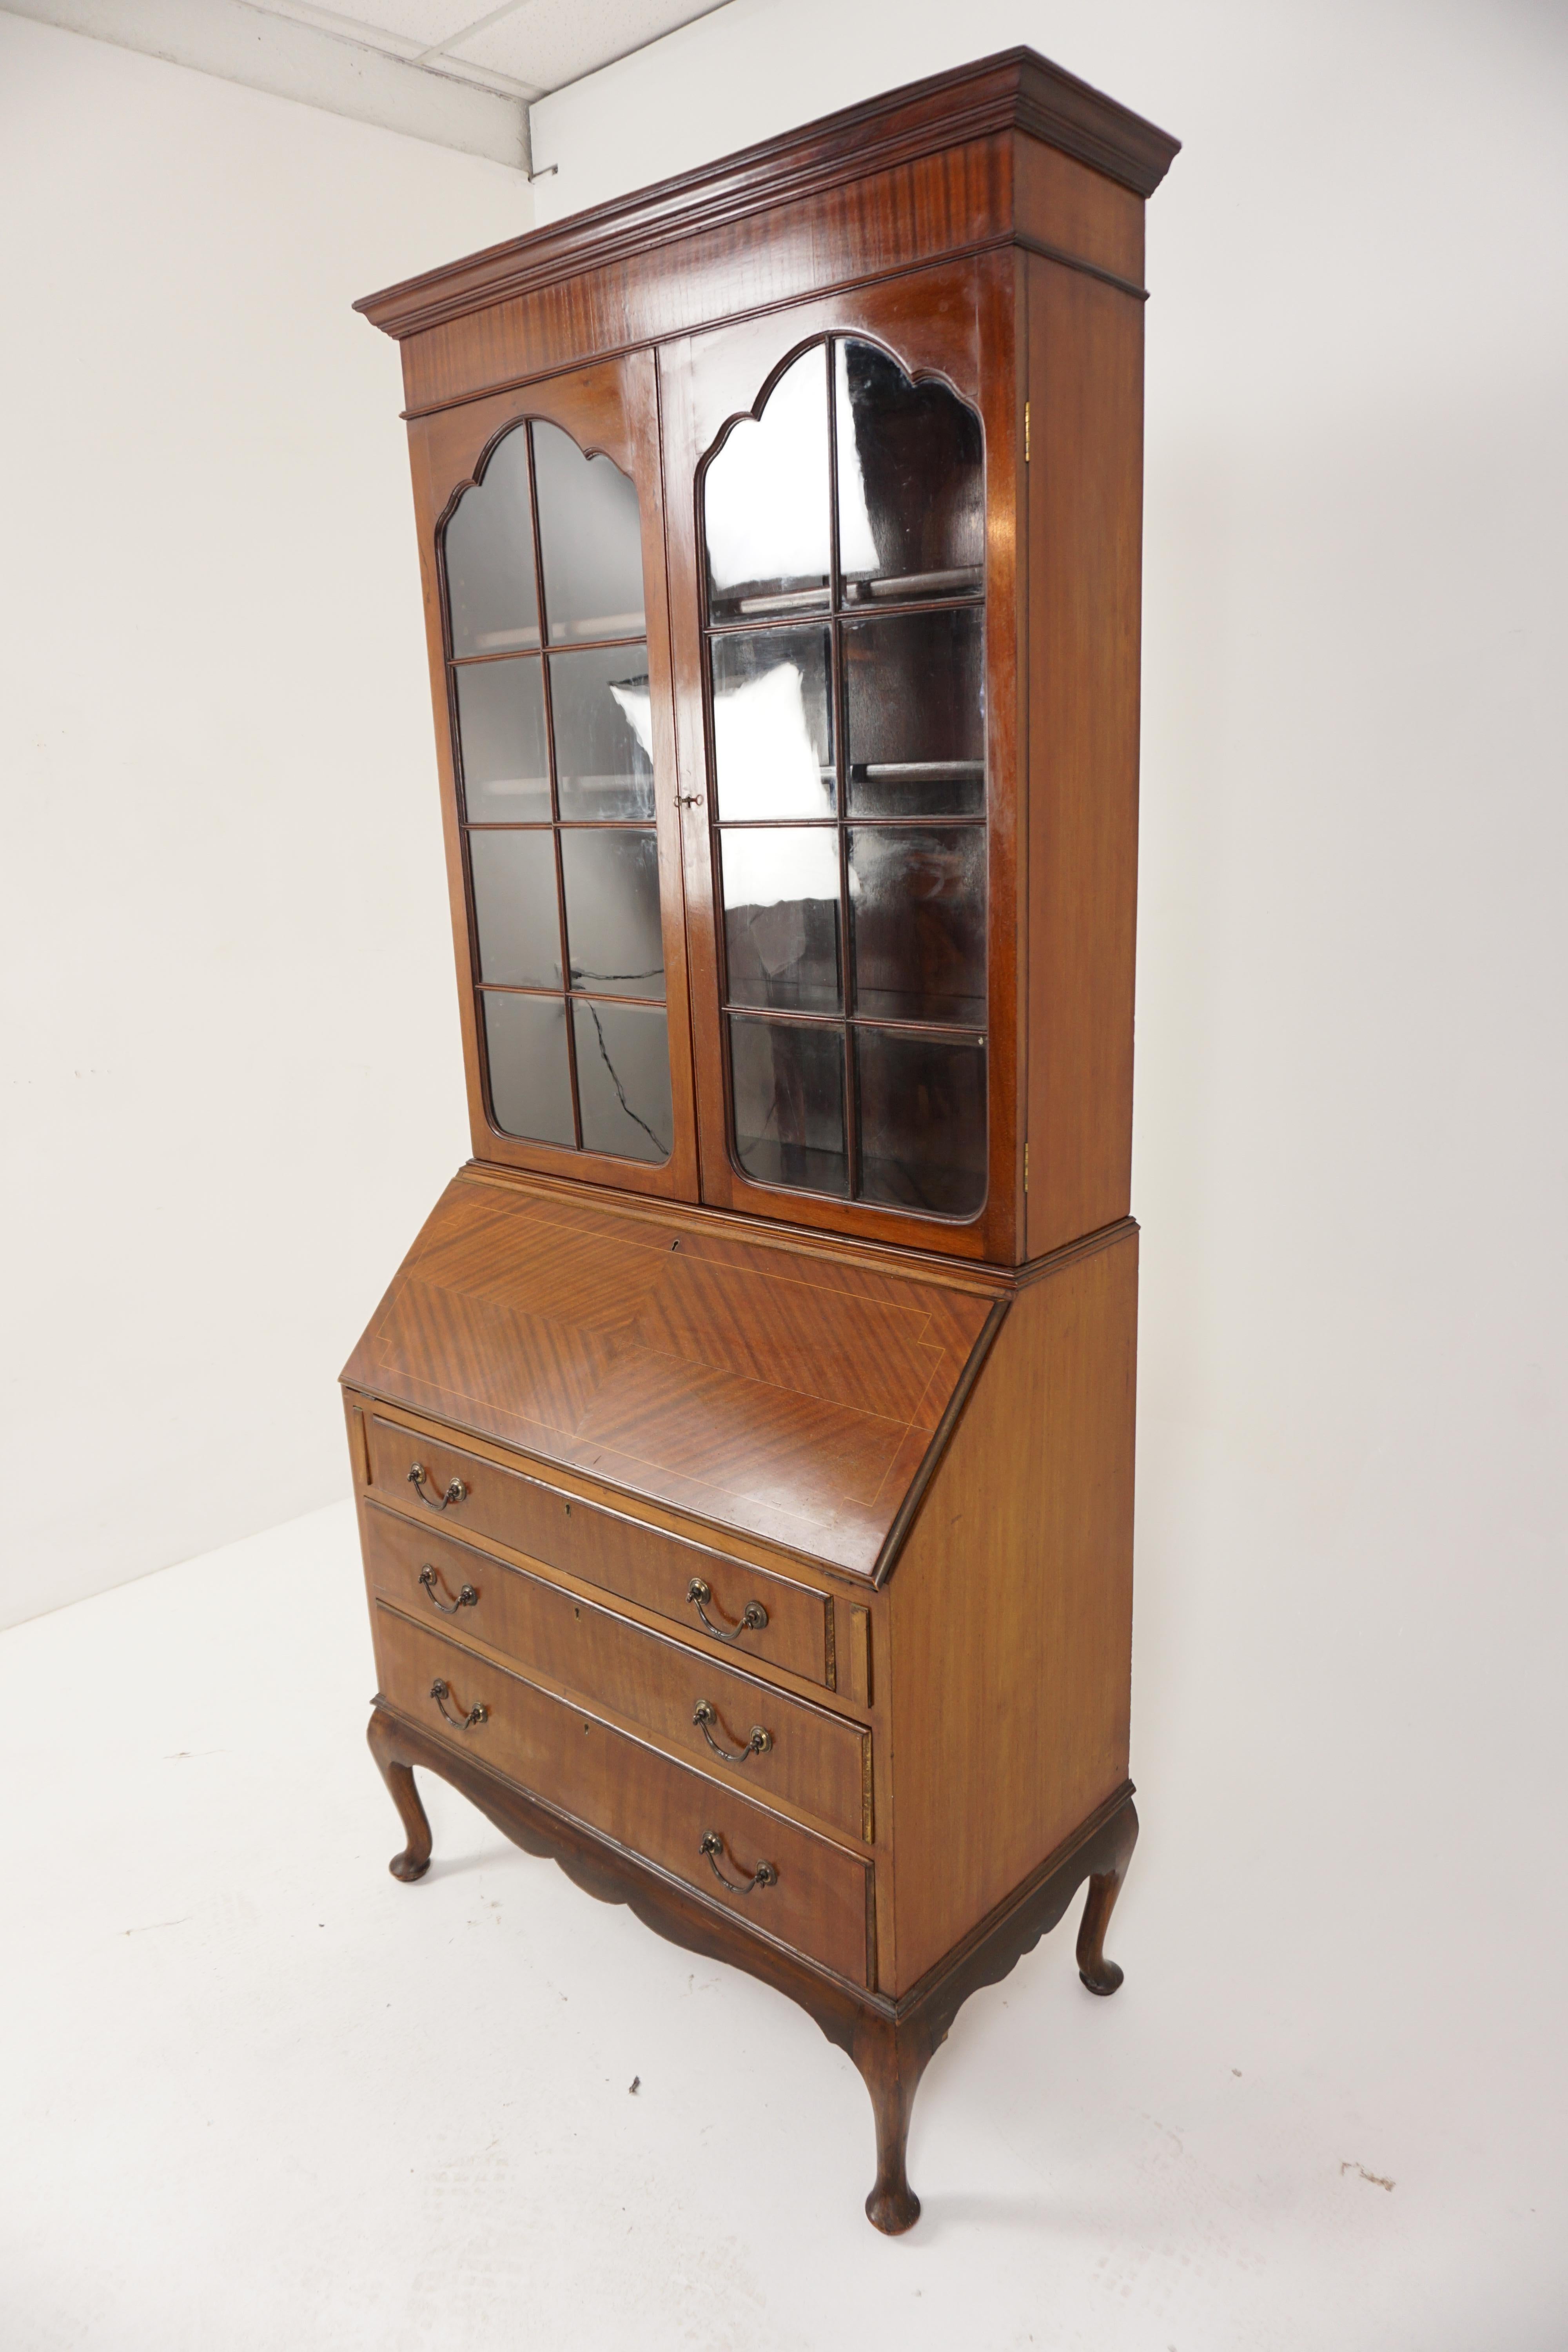 Edwardian inlaid bureau bookcase, secretaire, Scotland 1910, B2940

Scotland 1910
Solid walnut and veneer
Original finish
Cornice on top
Pair of original glass doors with moulding on the front 
Open to reveal three adjustable shelves
With